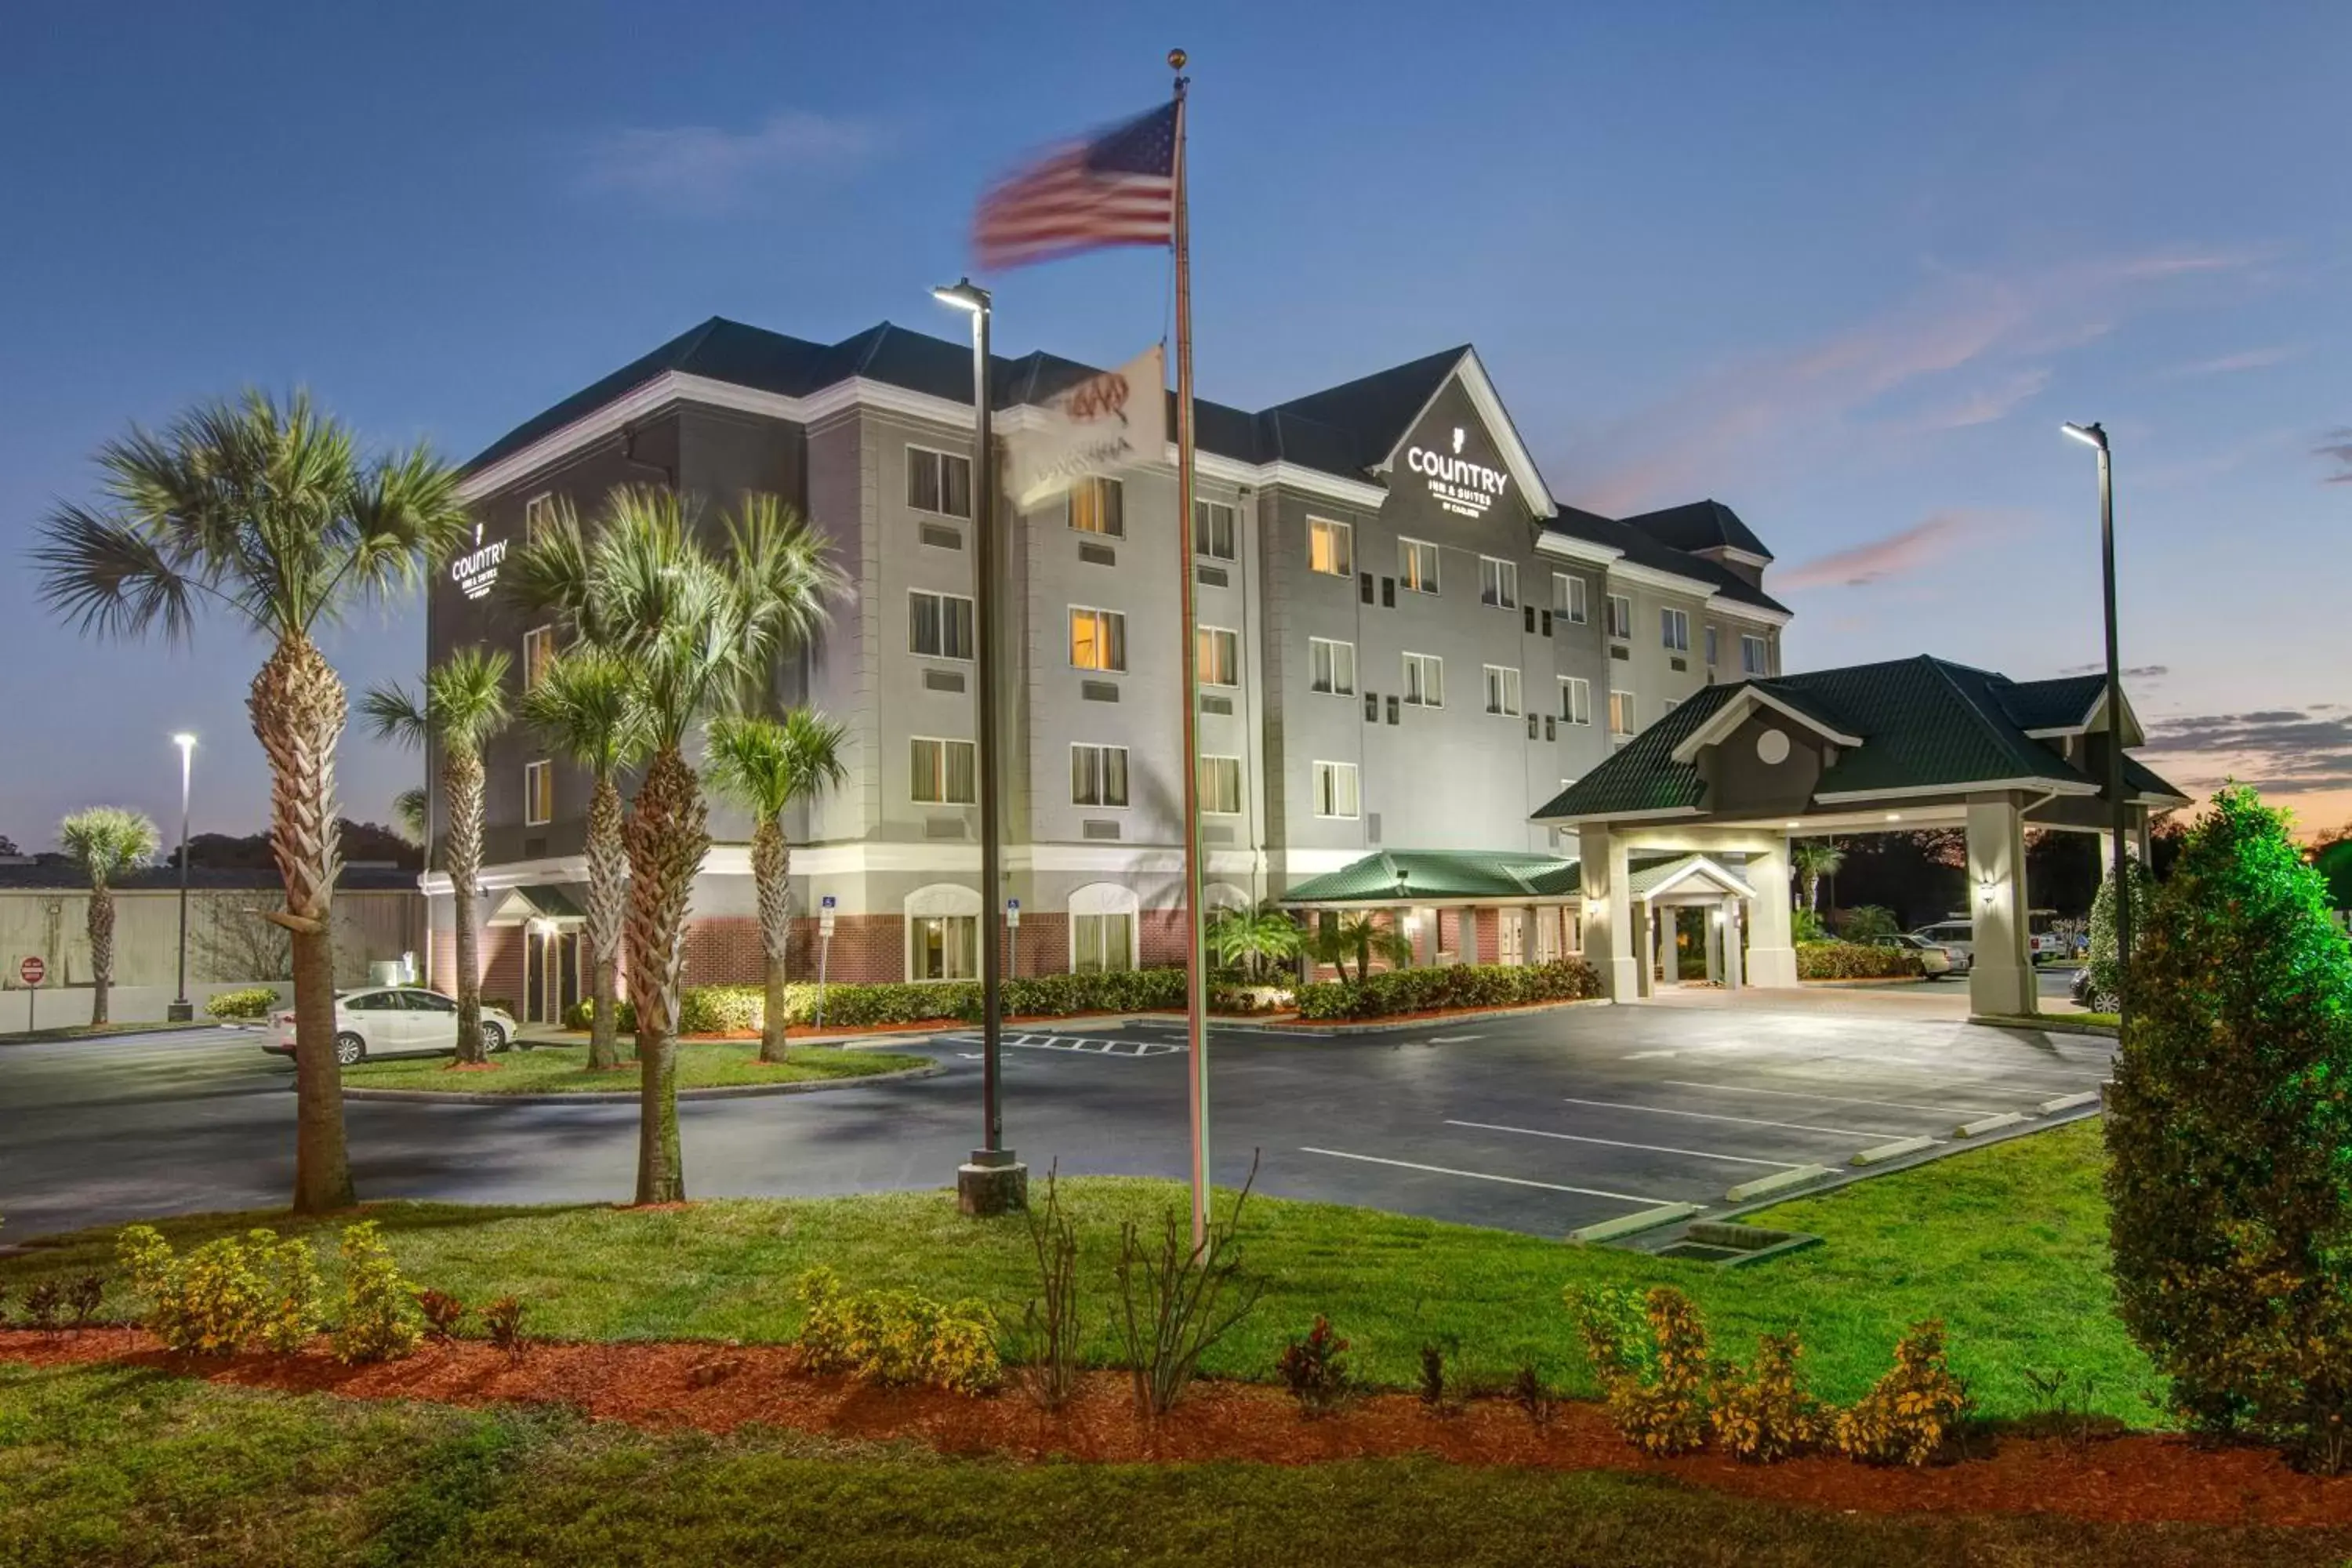 Facade/entrance, Property Building in Country Inn & Suites by Radisson, St. Petersburg - Clearwater, FL